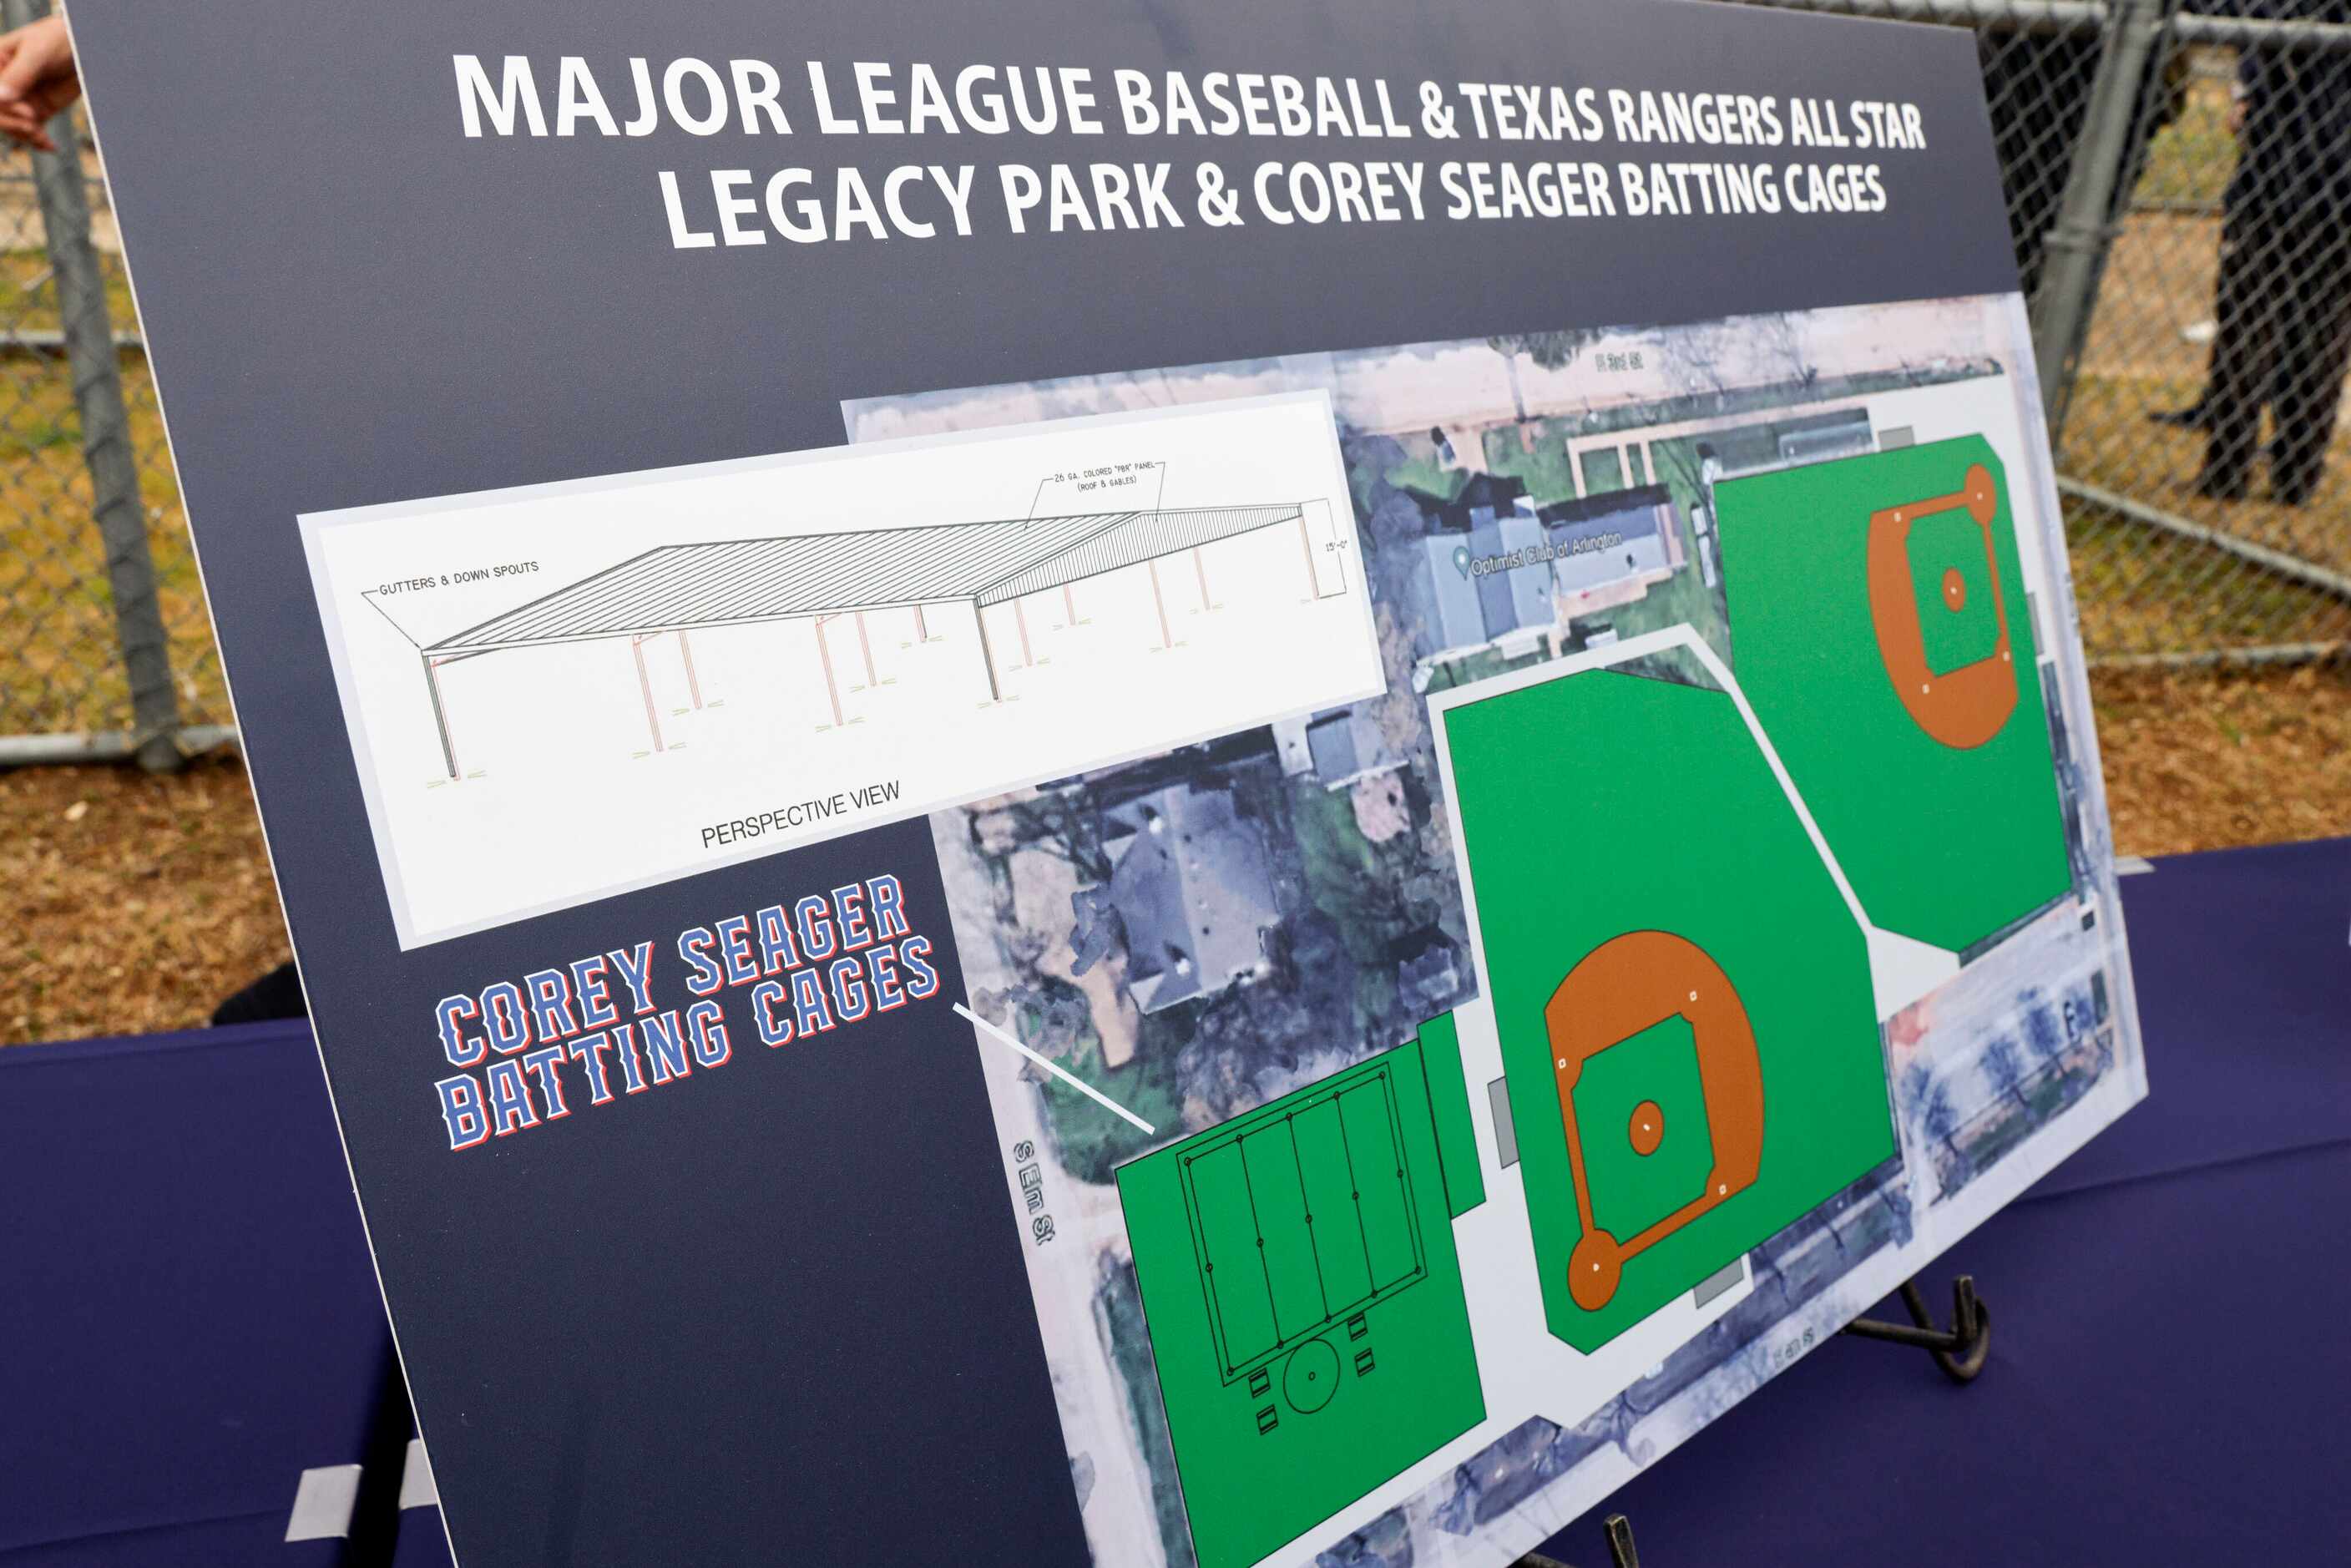 A rendering shows the design for the MLB and Texas Rangers All-Star Legacy Park and Corey...